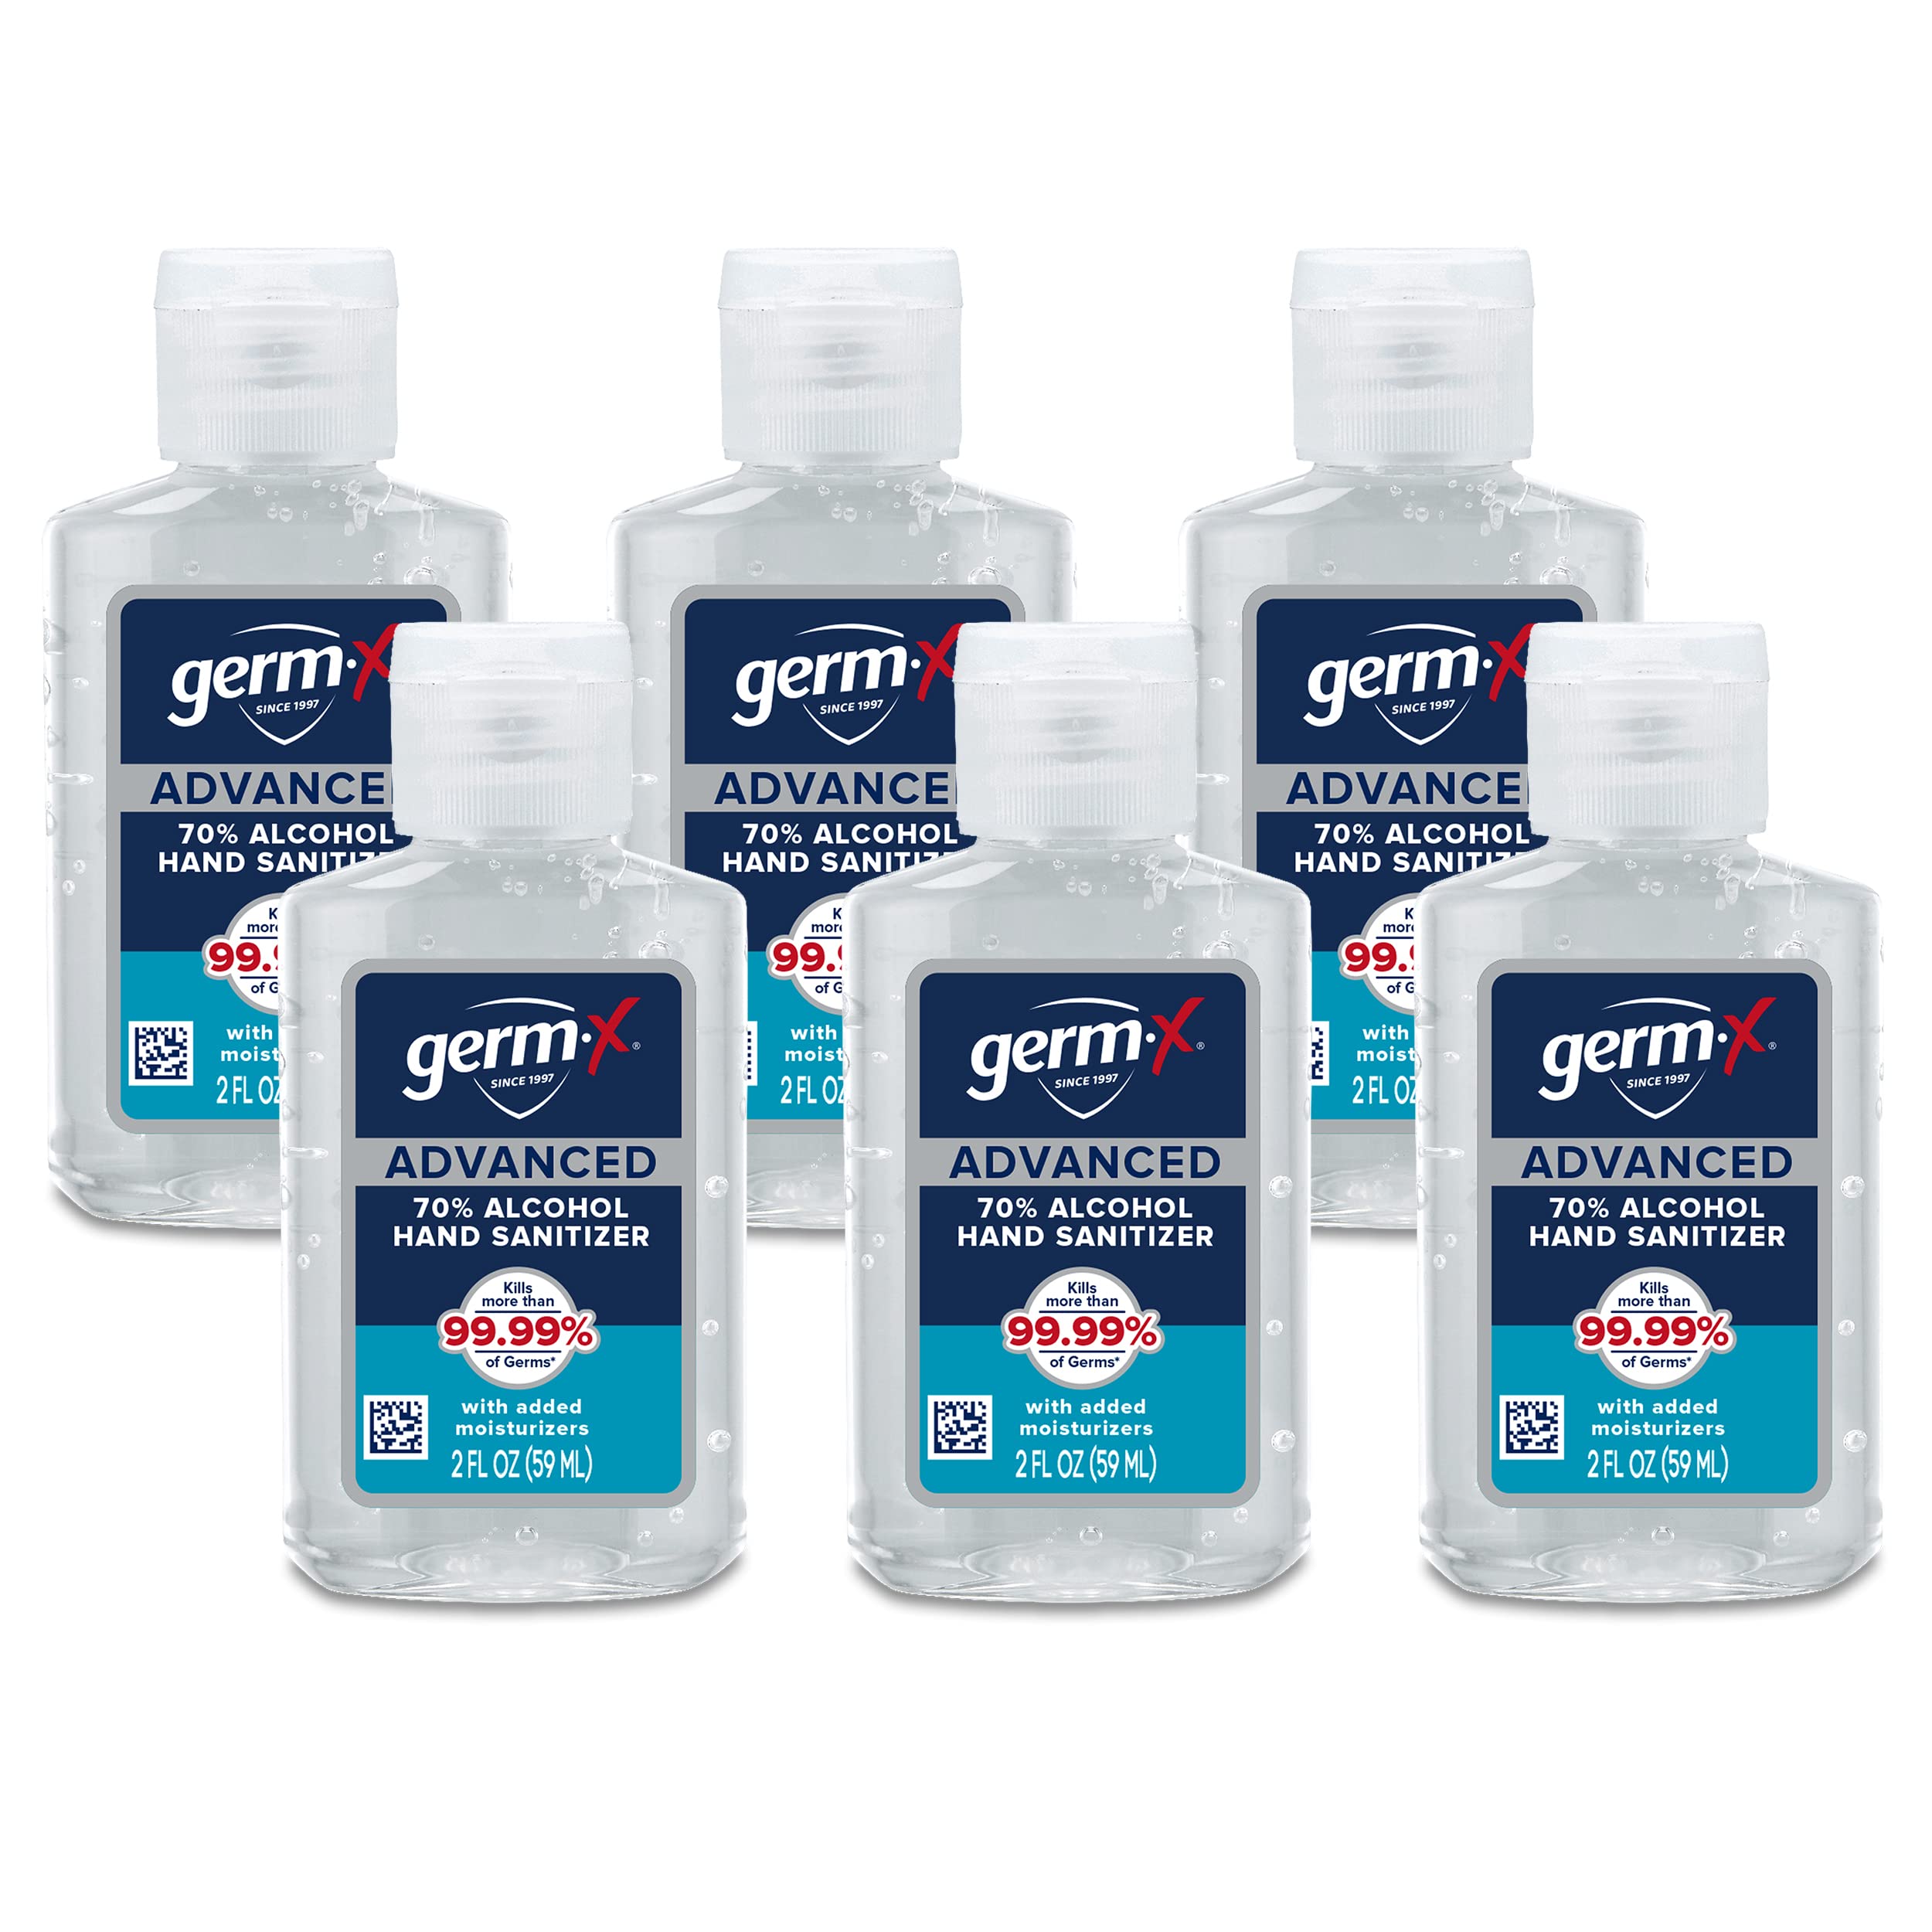 Germ-x Advanced Hand Sanitizer, Non-Drying Moisturizing Clear Gel, Instant and No Rinse Formula, Mini Travel Size for On-The-Go, 2 Fl Oz (Pack of 6)